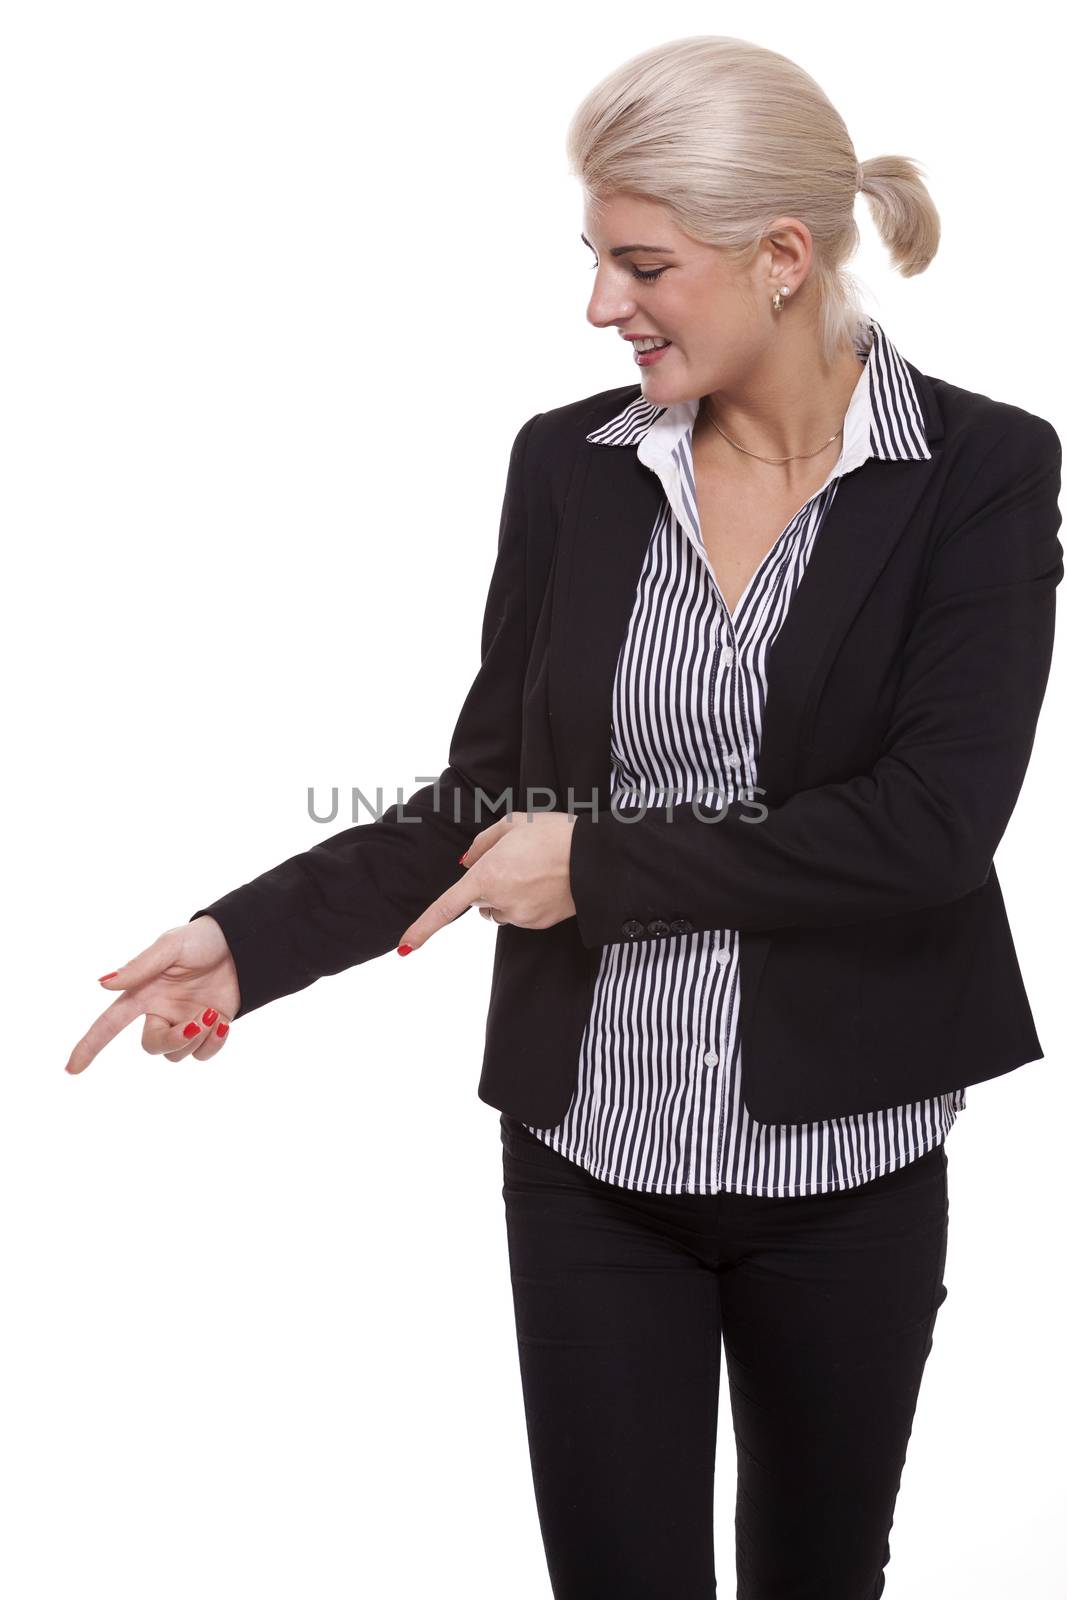 Businesswoman Pointing Up While Looking at Camera by juniart